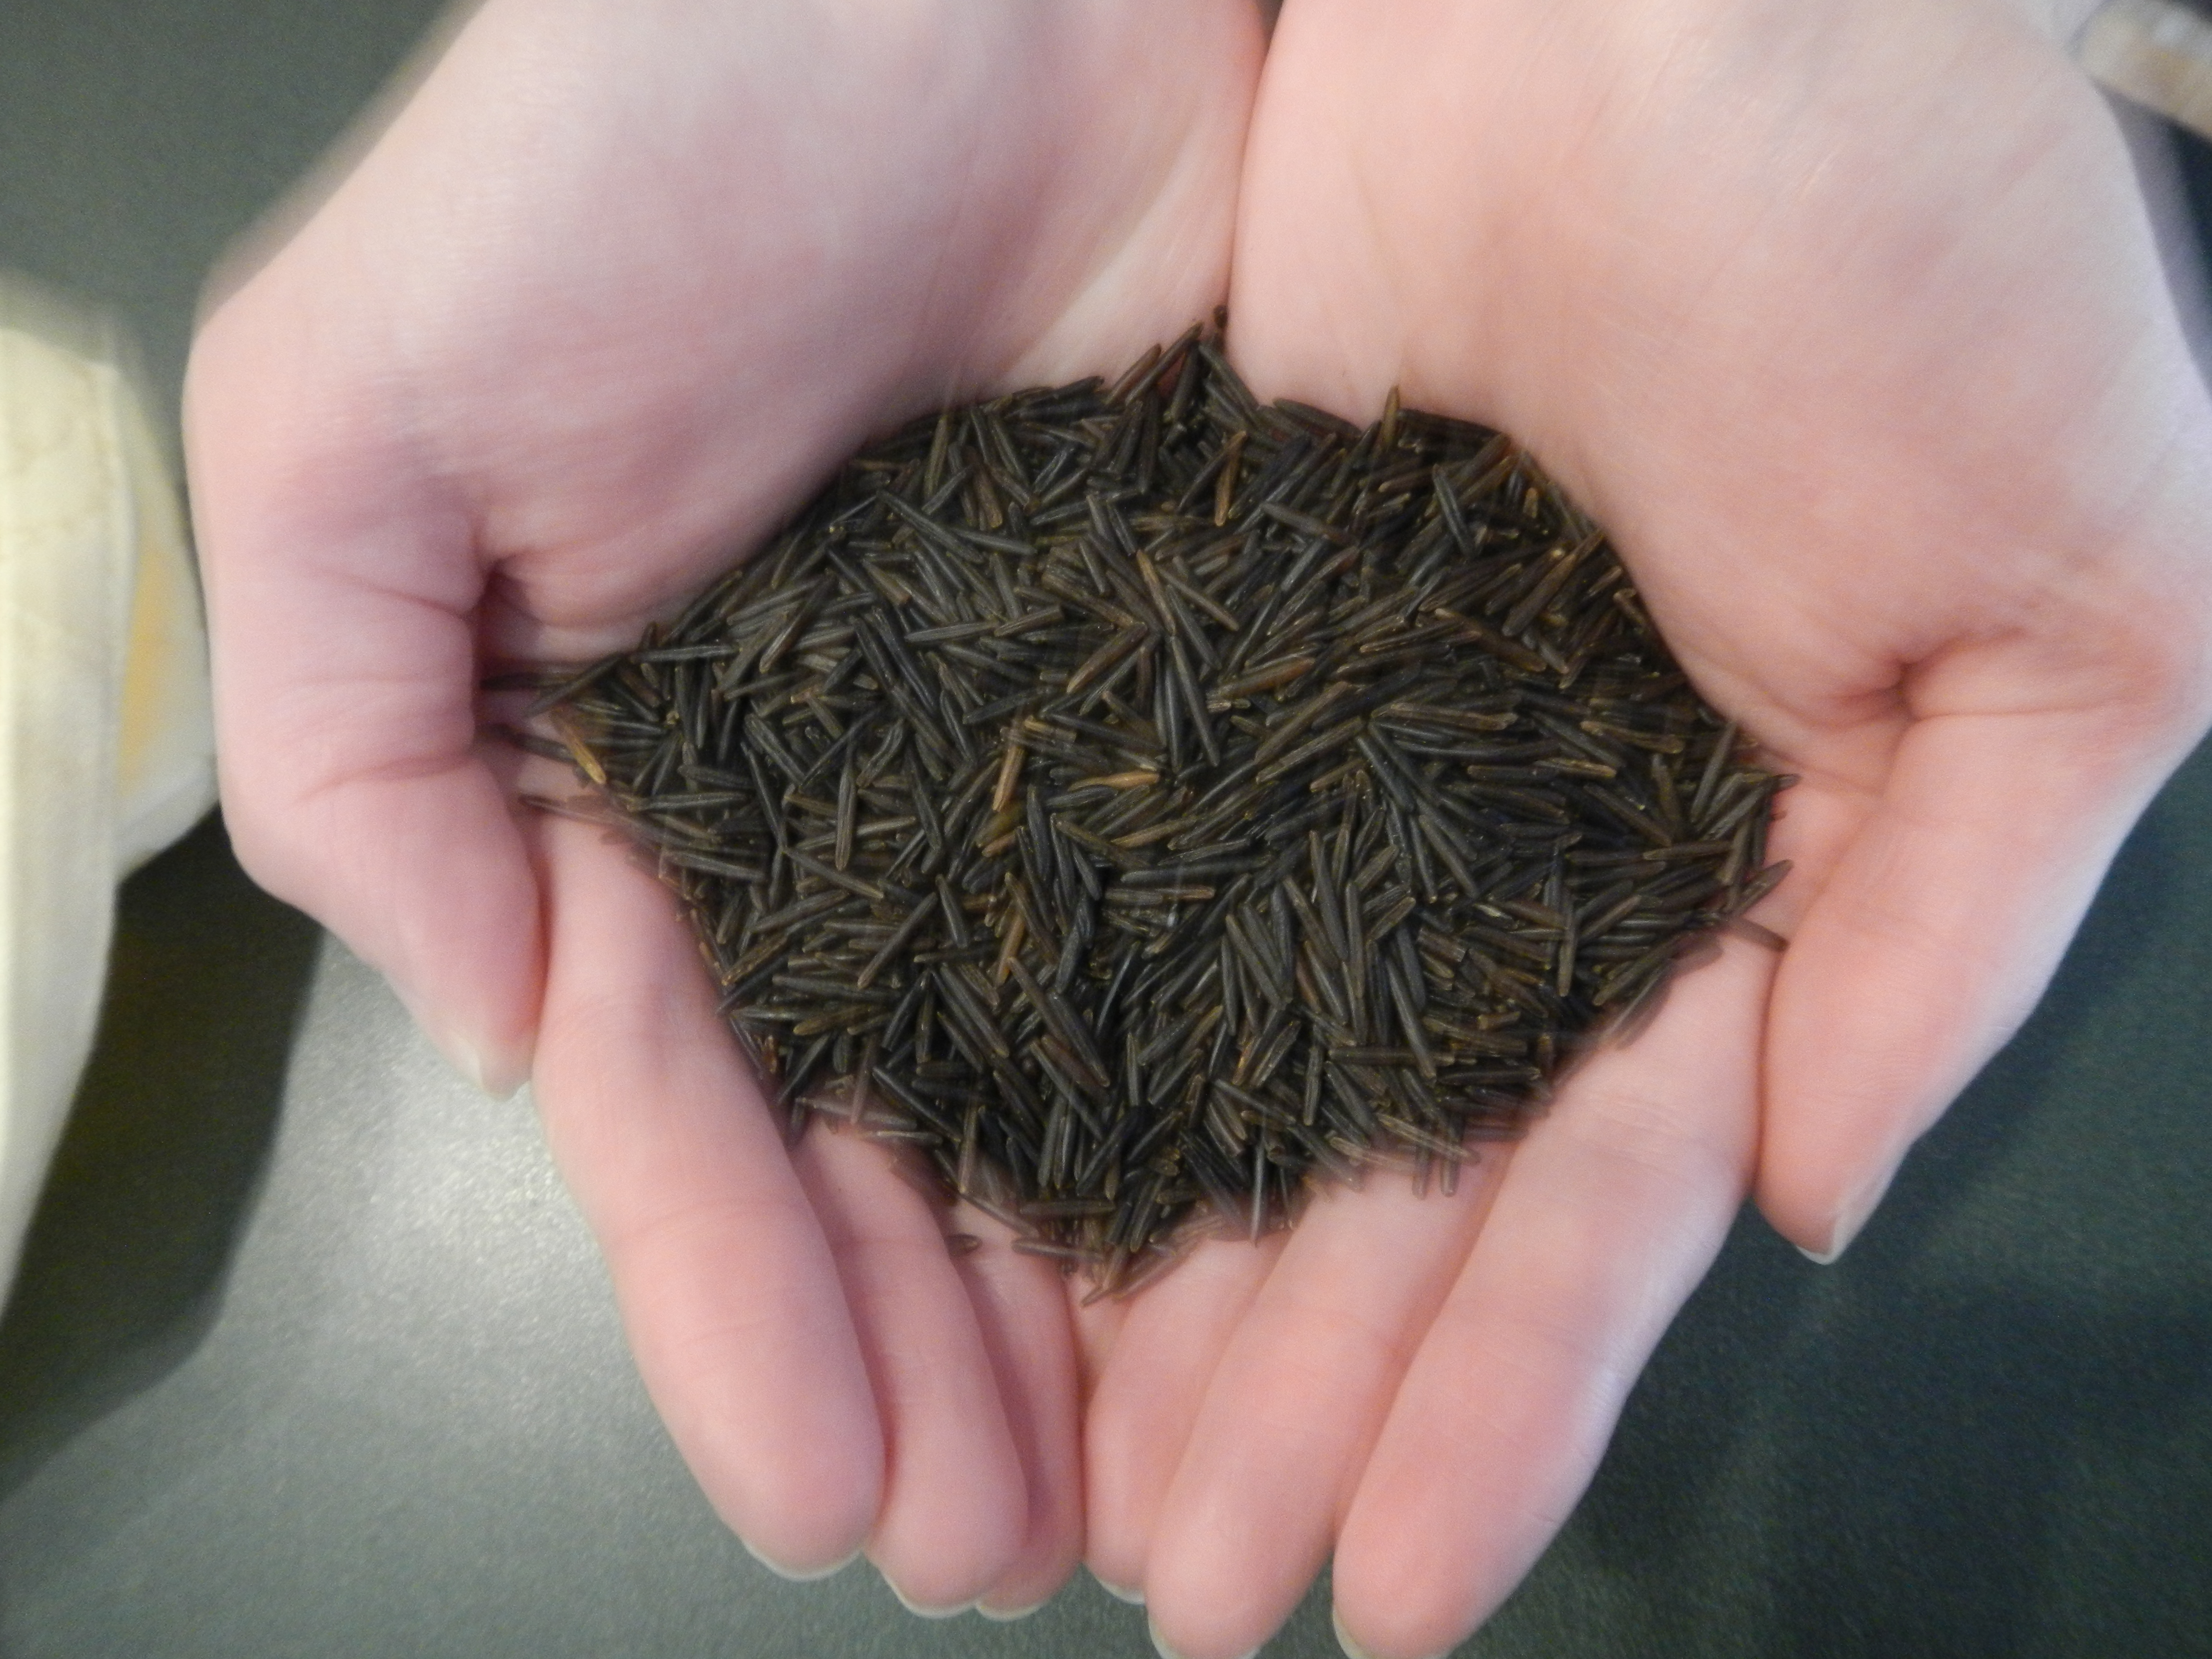 Image shows hands cupped around wild rice grains.